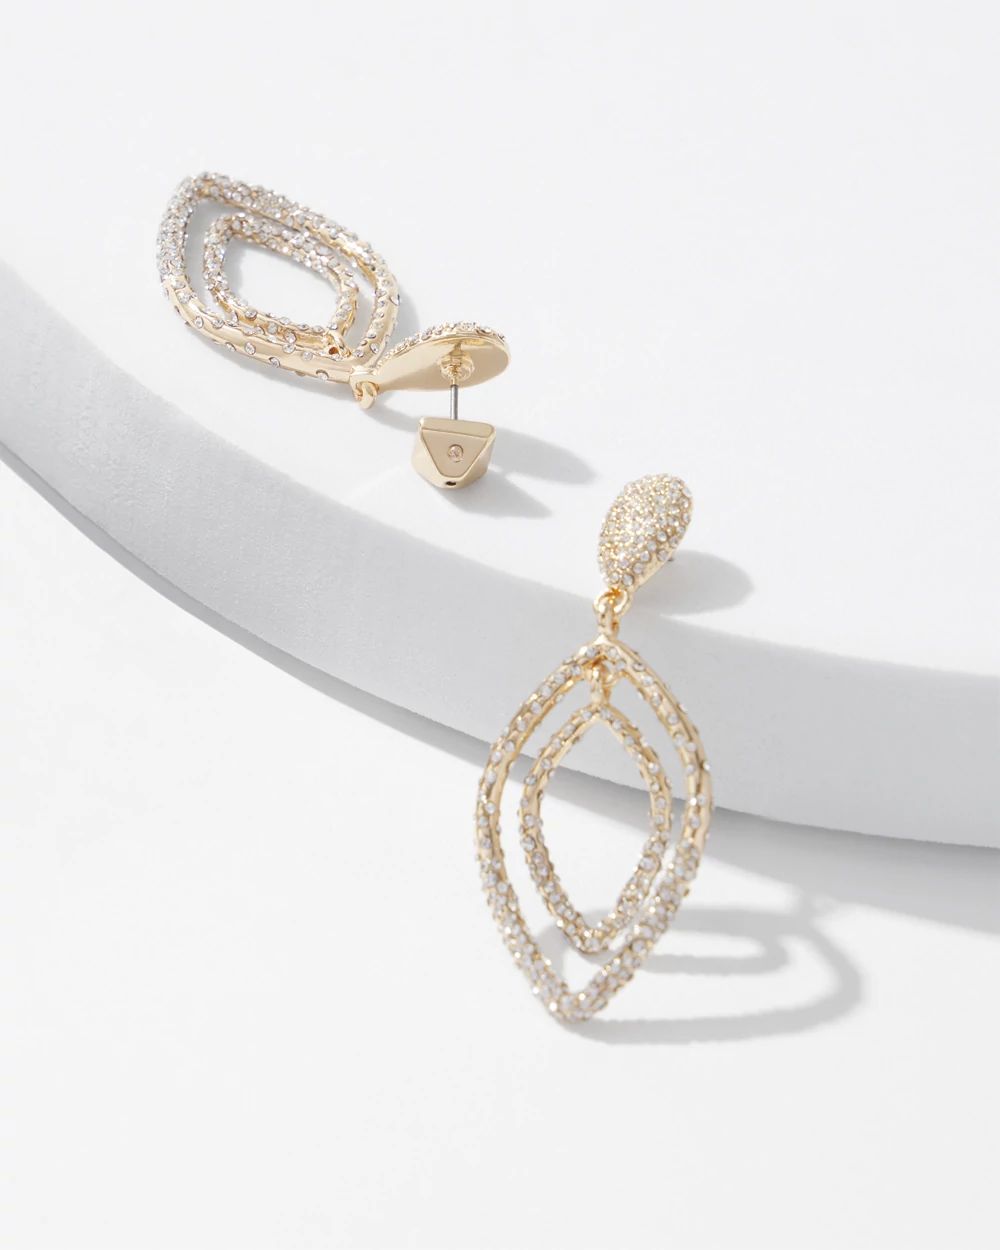 Gold-Dusted Pave Pedant Earrings